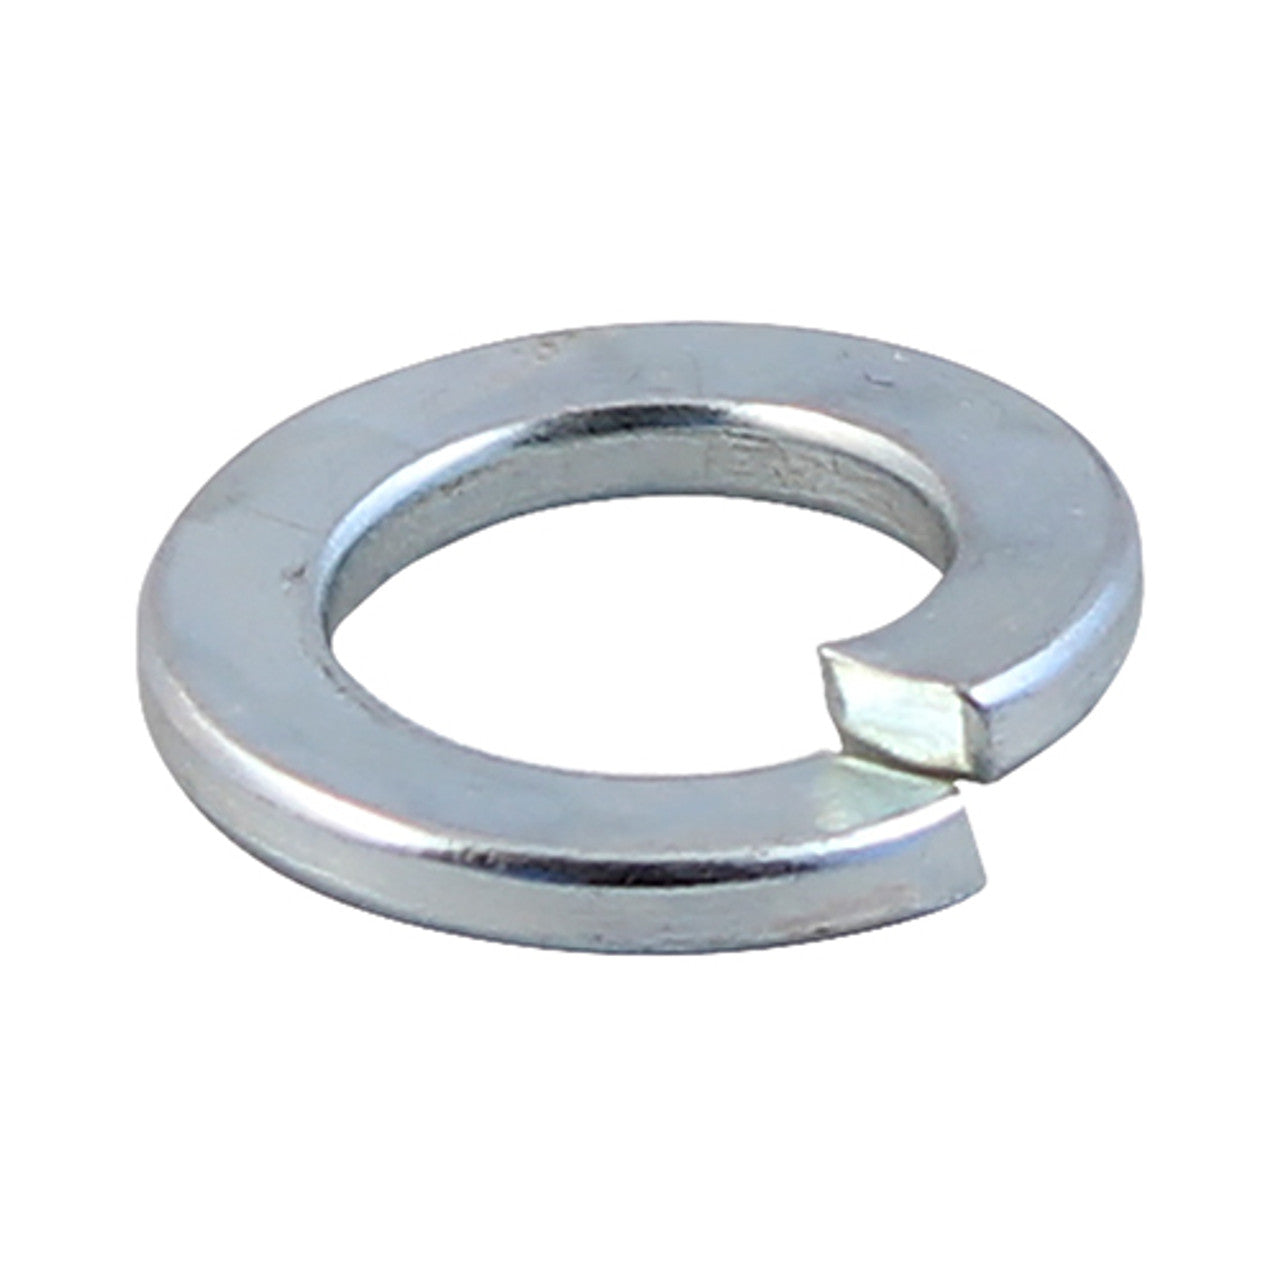 A2 Stainless Steel Spring Washers -  SSSWA2-932